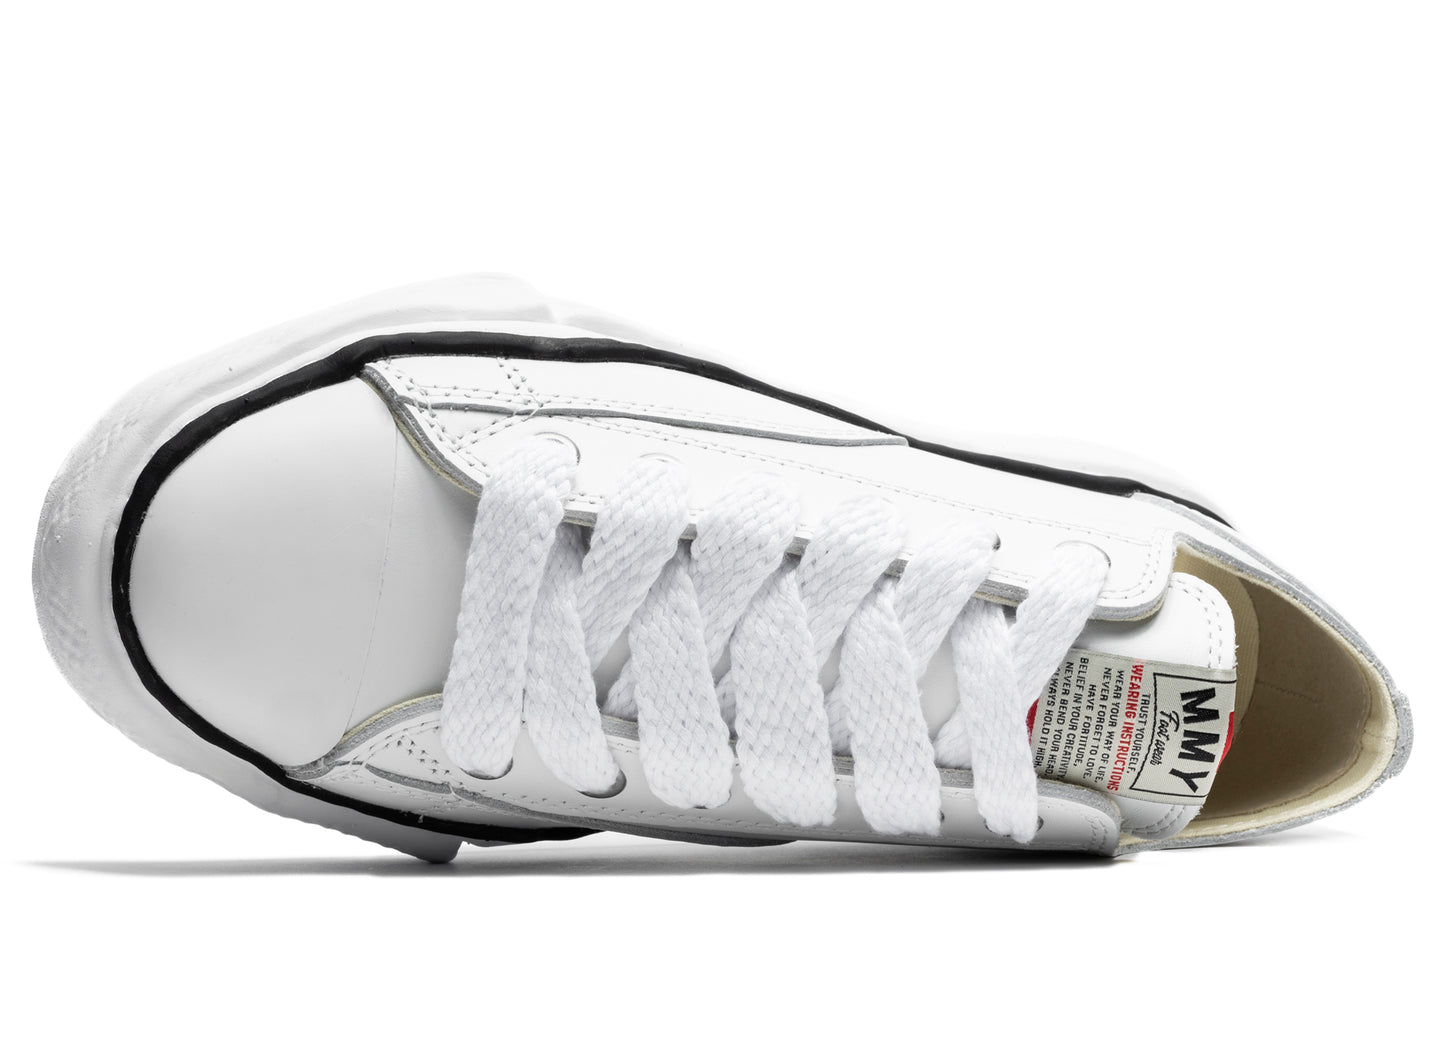 Maison Mihara Yasuhiro Low Top Lace Up Sneaker in White